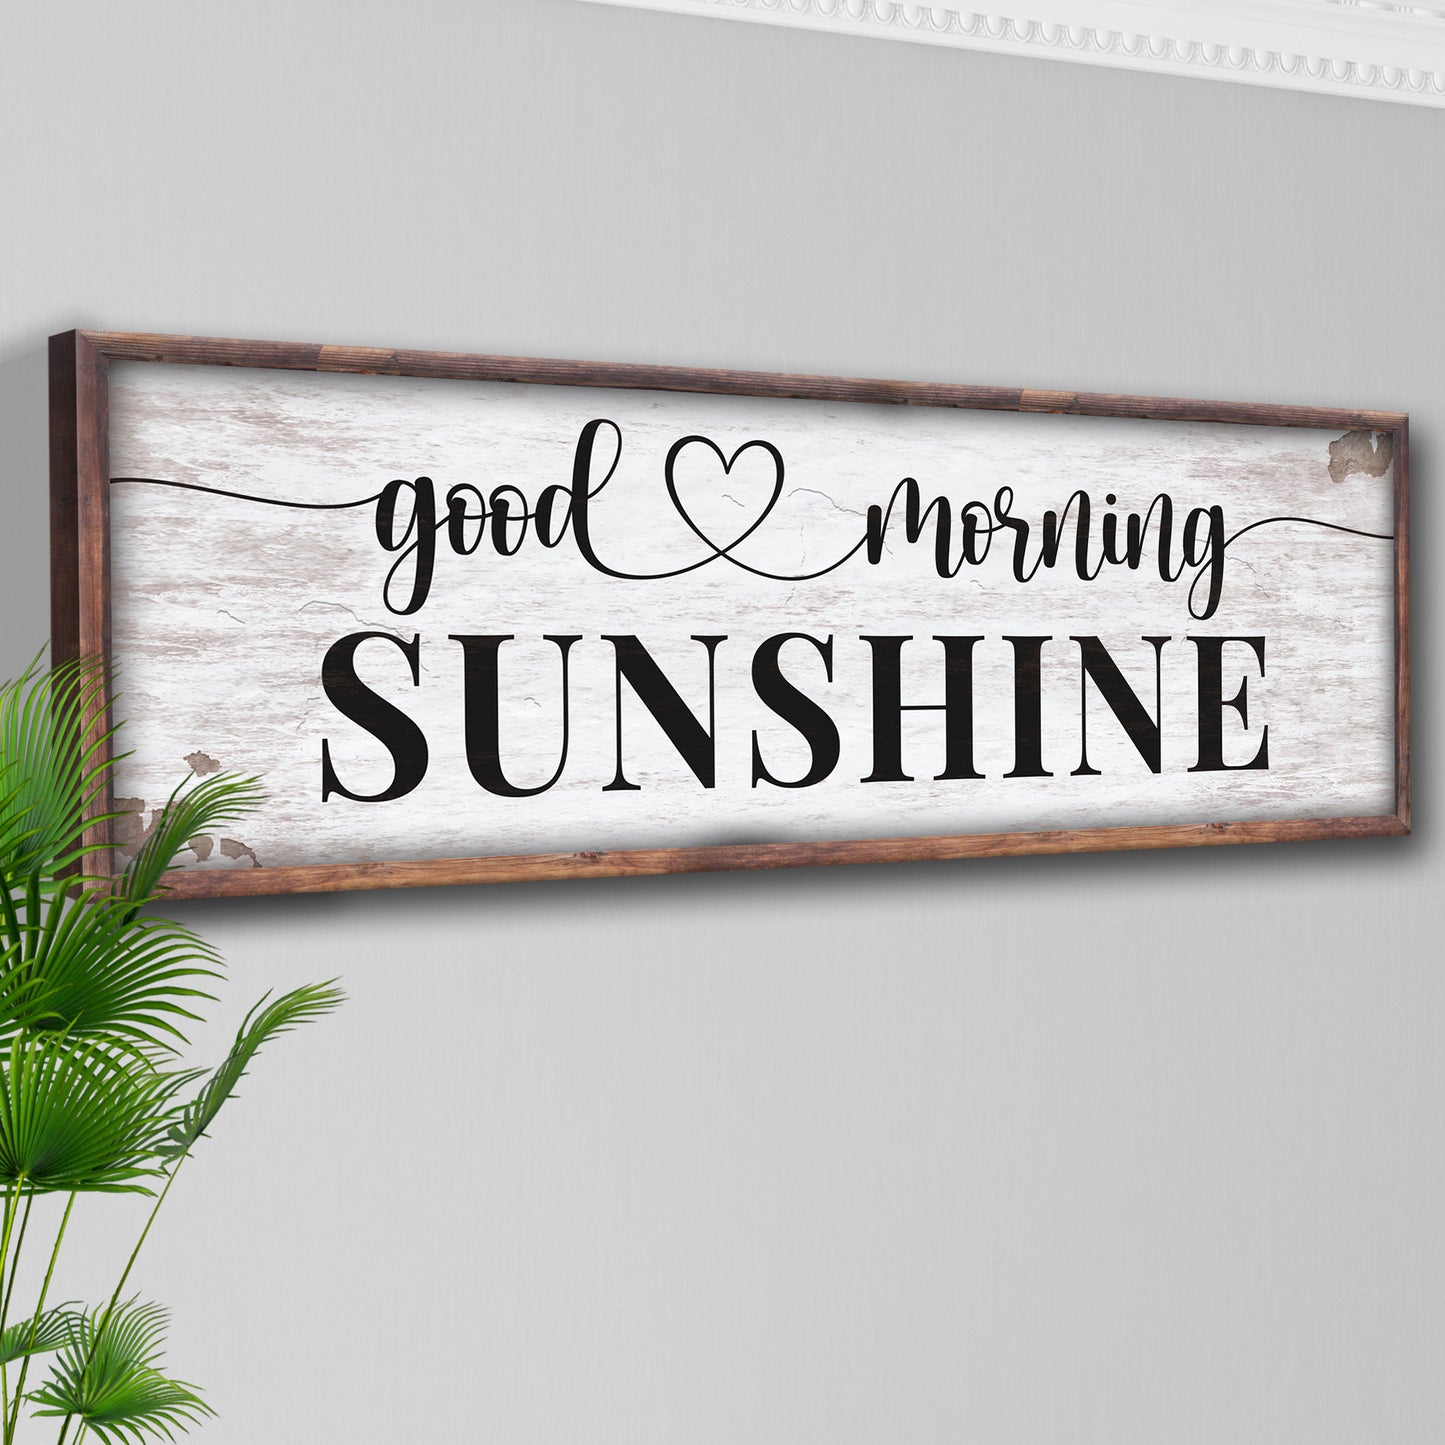 Good Morning Sunshine Sign Style 2 - Image by Tailored Canvases